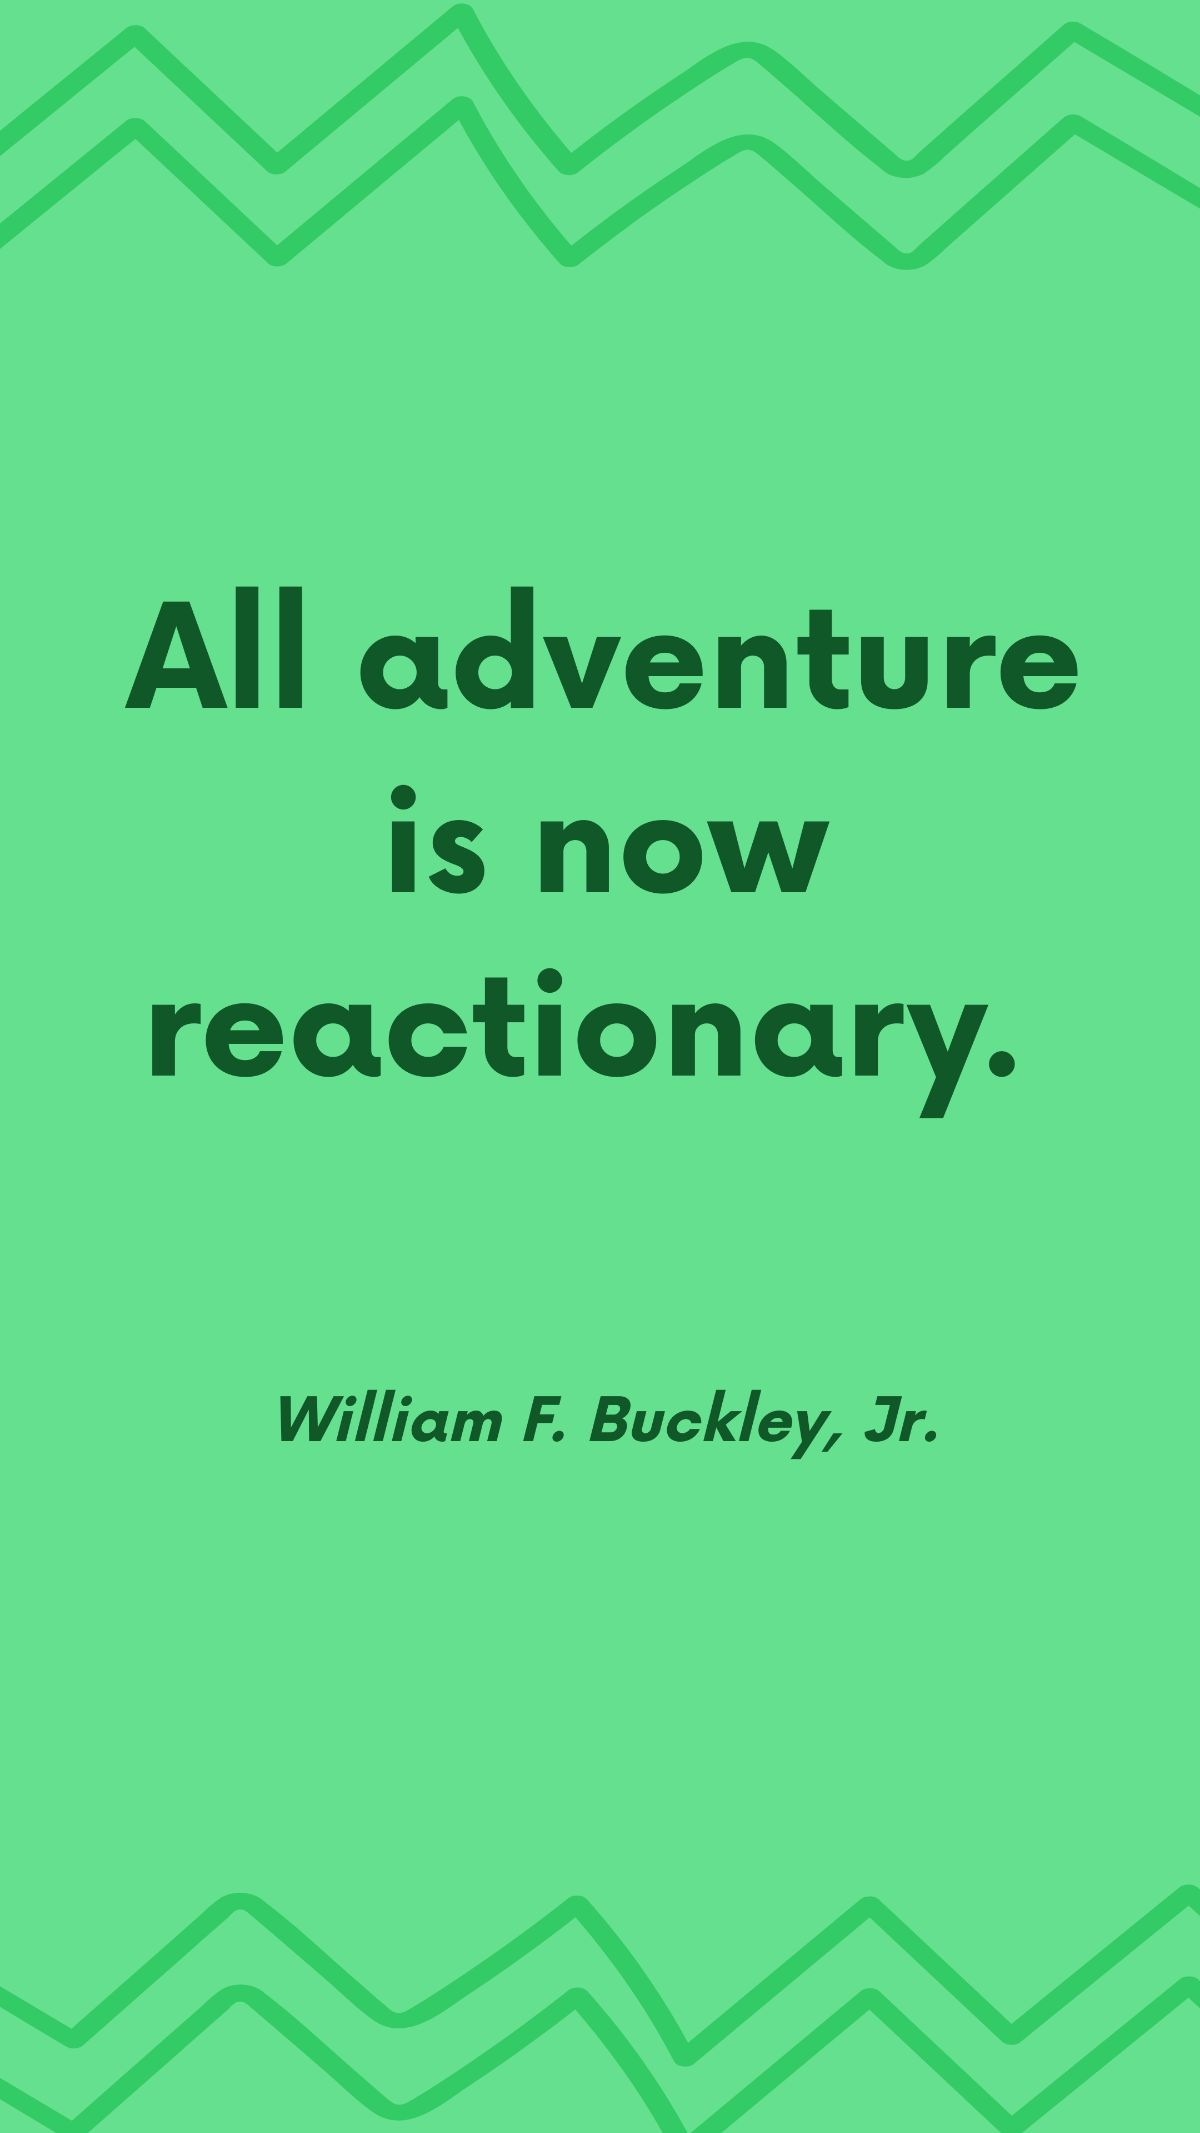 William F. Buckley, Jr. - All adventure is now reactionary. Template